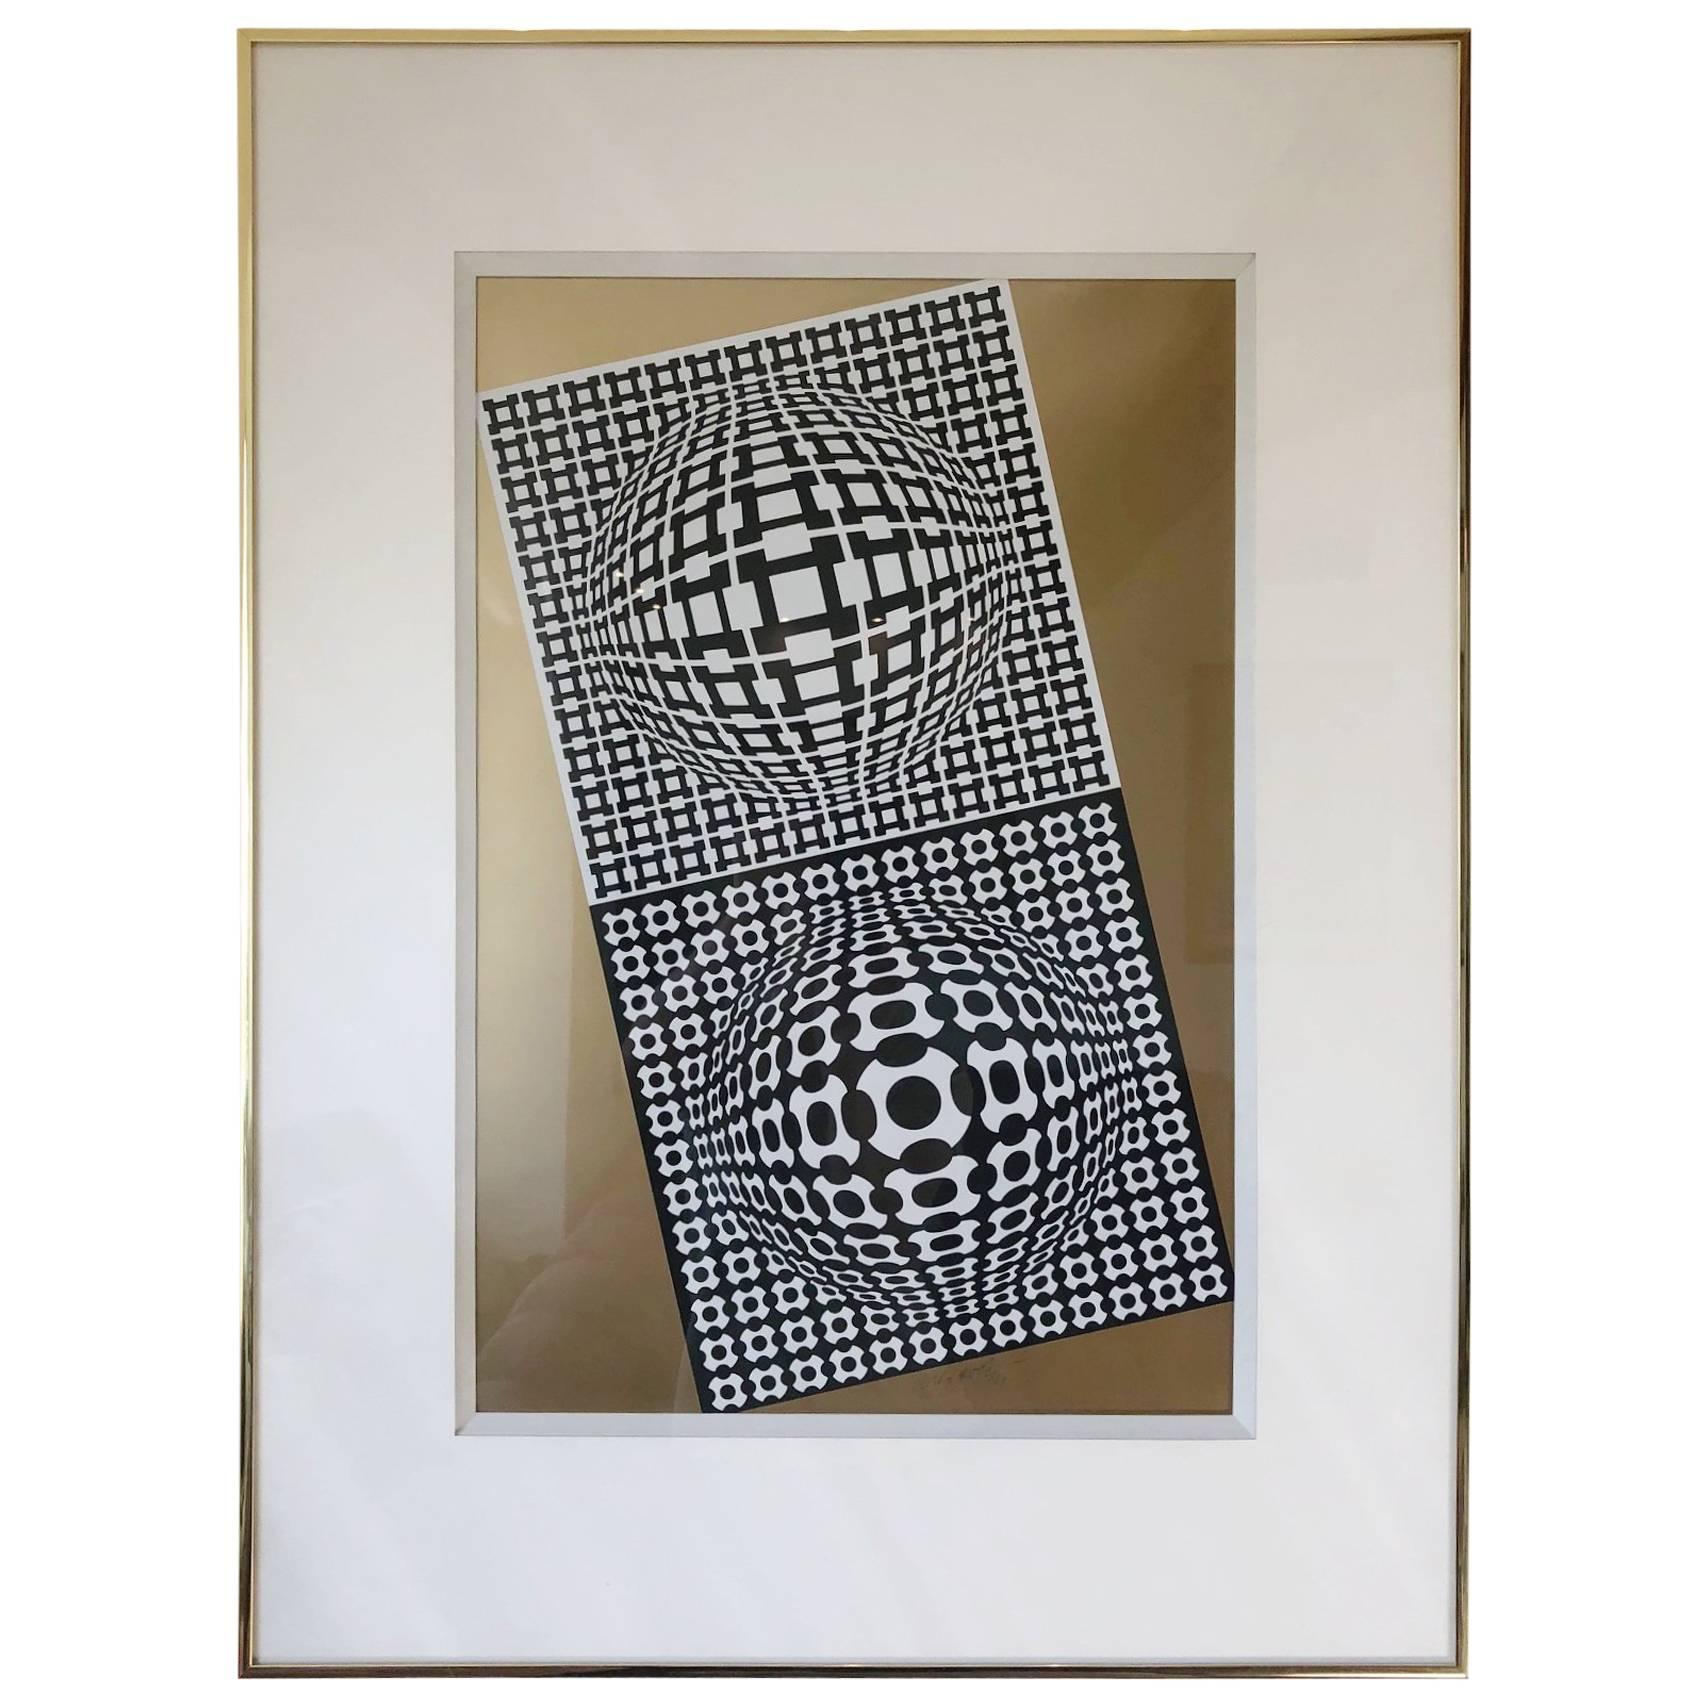 Victor Vasarely "Violon" Screenprint, Dated 1982, Signed and Numbered